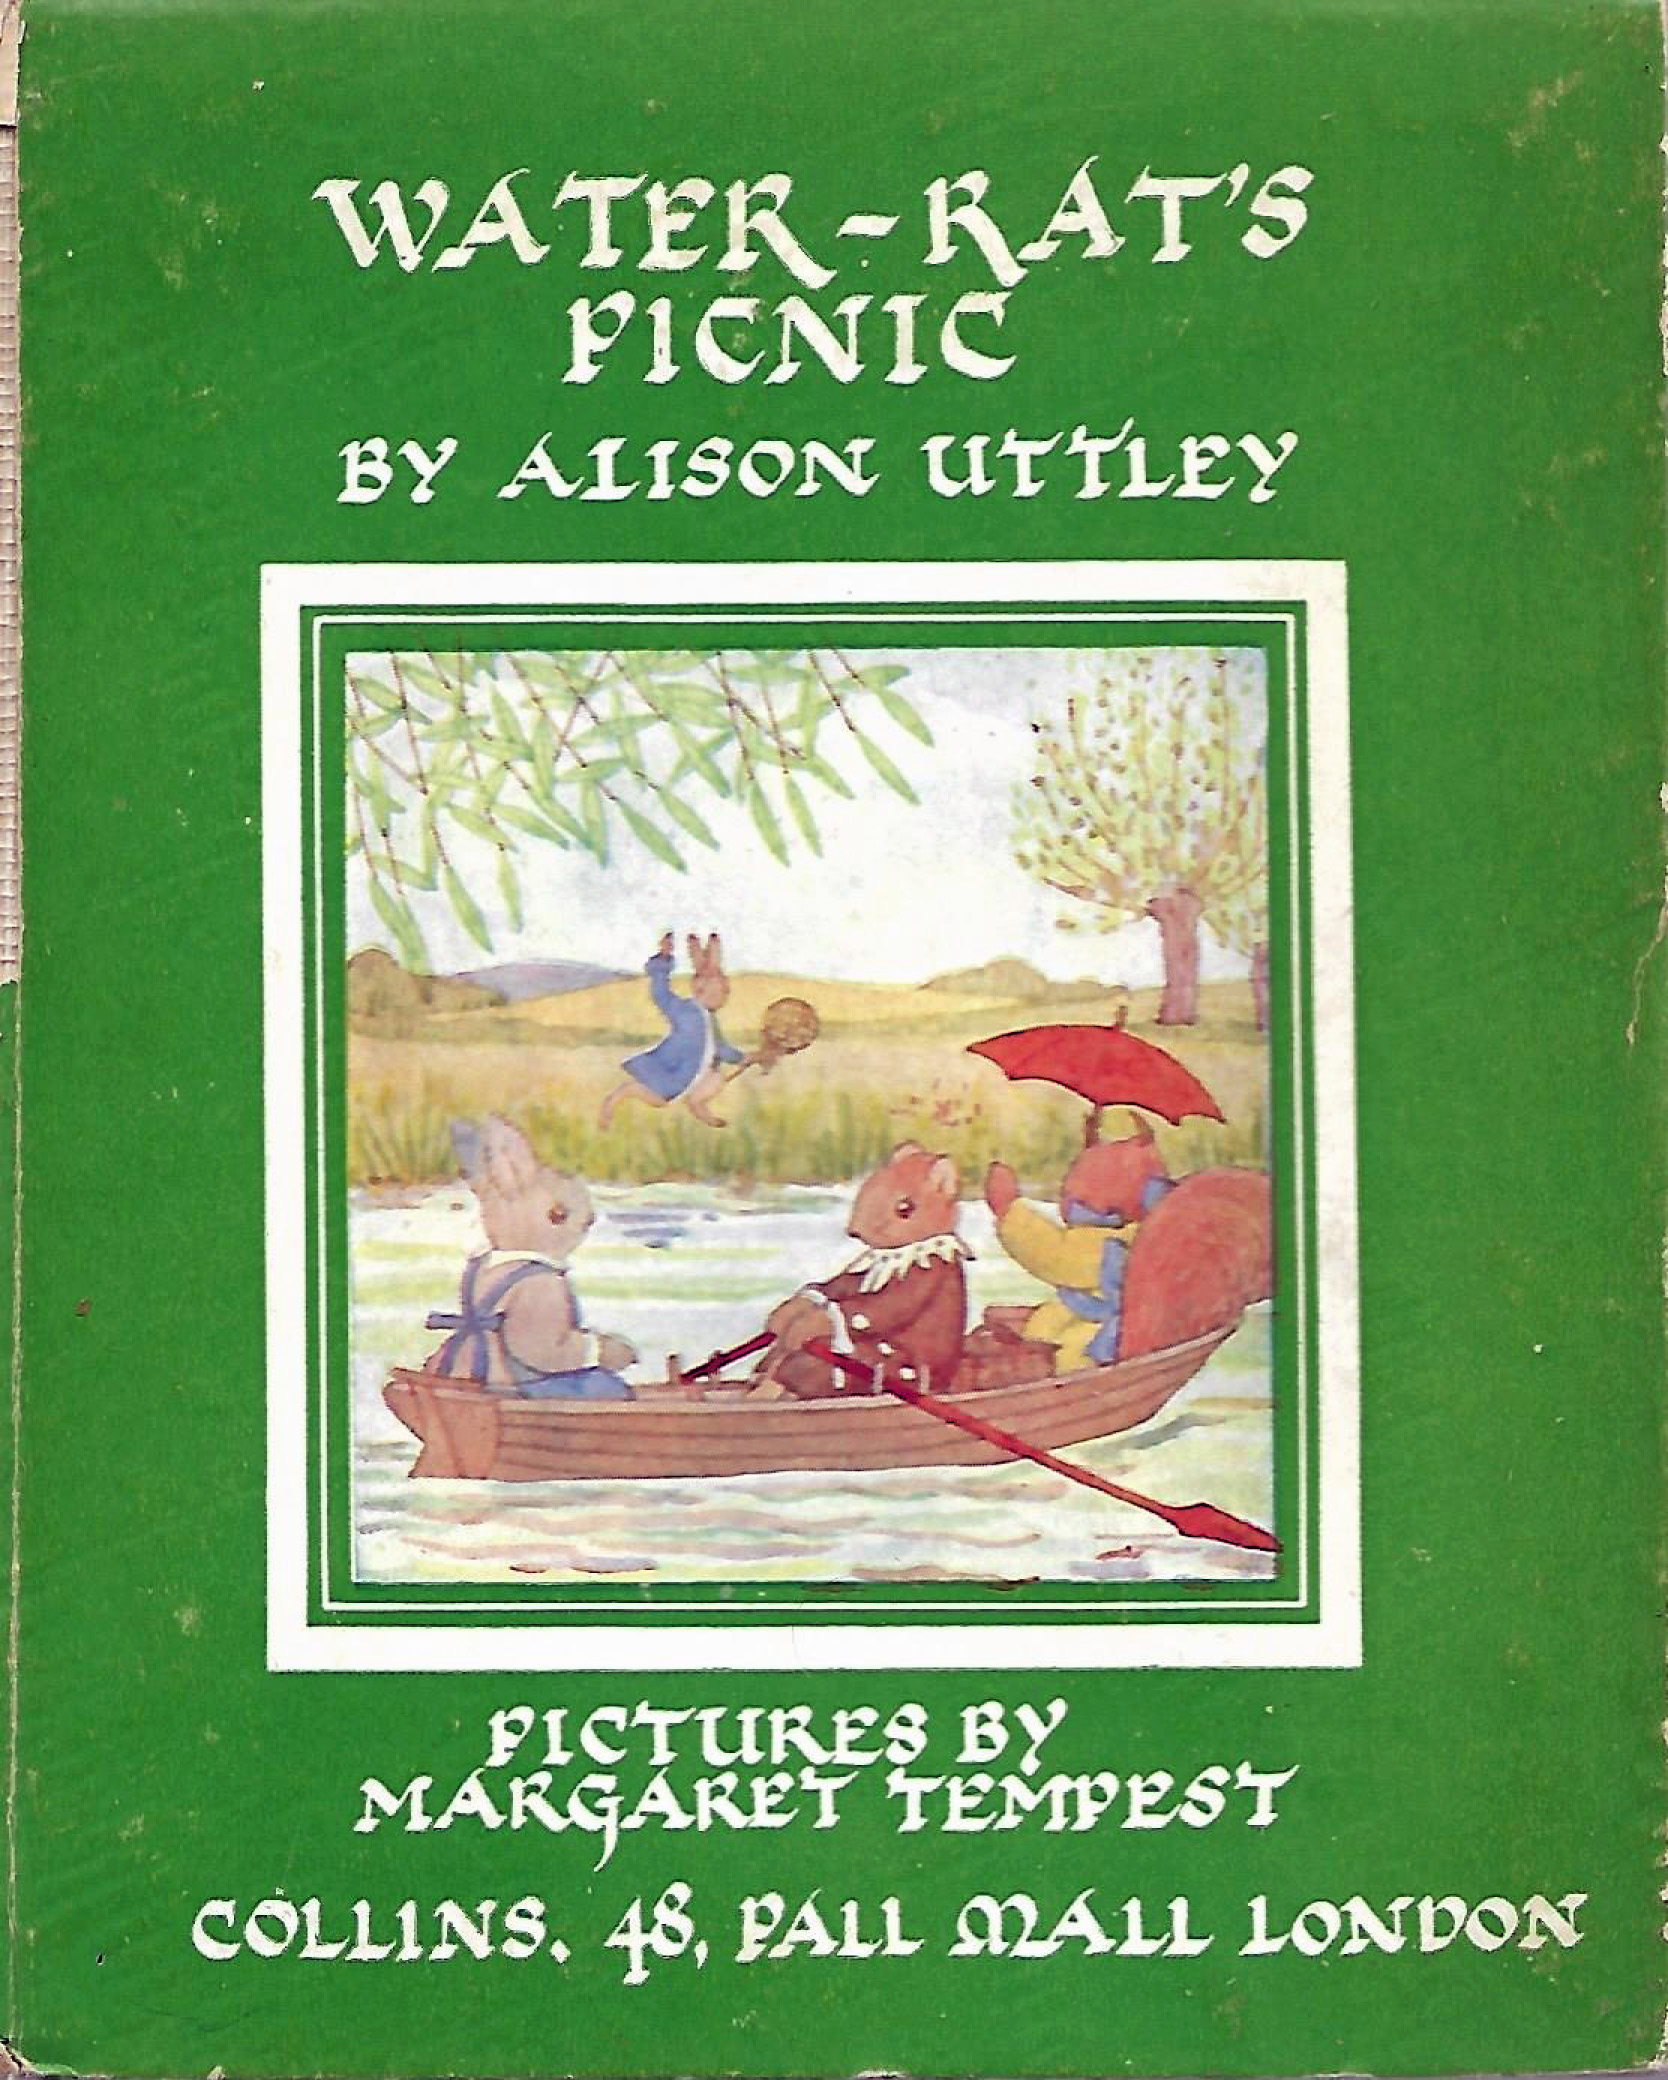 Water-rats picnic - Alison Uttley - 1944-1